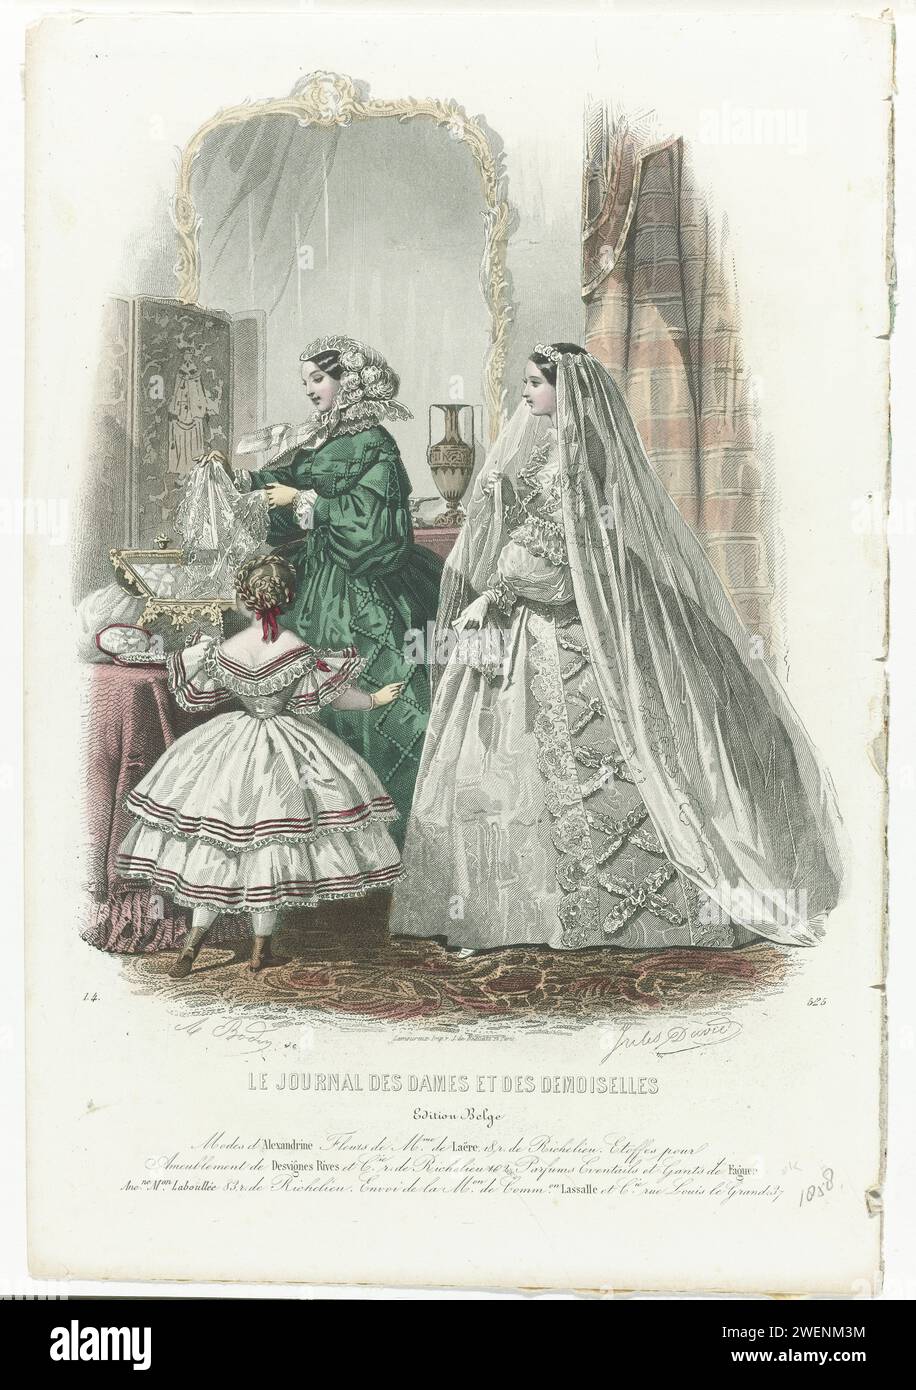 The Journal des Dames et des Demoiselles, 1858, 1.4, No. 525: Belgian Edition, Modes (...), 1858  A bride, wife and girl around a 'Corbeille de Mariage' or bridal basket. Left: 'toilette' suitable for a girl from eight to ten years old. Klapon of 'Tarlatane', decorated with 'Petits Velours'. Body decorated with Berthe and Lace. Midden: 'Toilette de Ville'. Taf side dress, decorated with cords and brushes of silk and chenille. 'Chapeau Marie-Stuart' from Witte Crepe, decorated with blonde (bobbin) and feathers, taf side. Right: 'Toilette de Mariée'. Wedding gown from 'Moire Antique', decorated Stock Photo